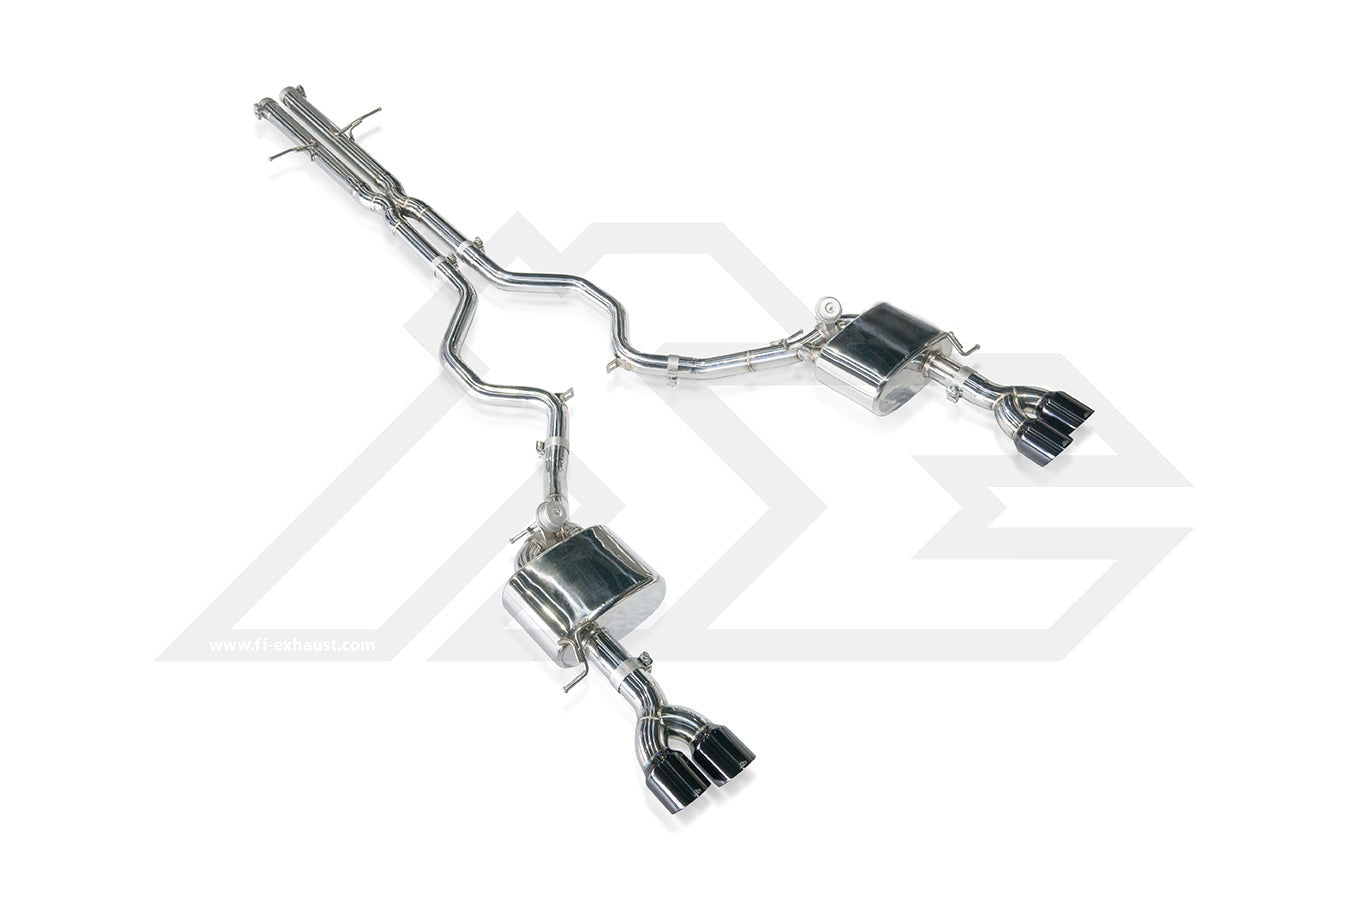 Fi Exhaust Valvetronic Exhaust System For Range Rover SV Autobiography L405 5.0 Supercharged V8 17-22